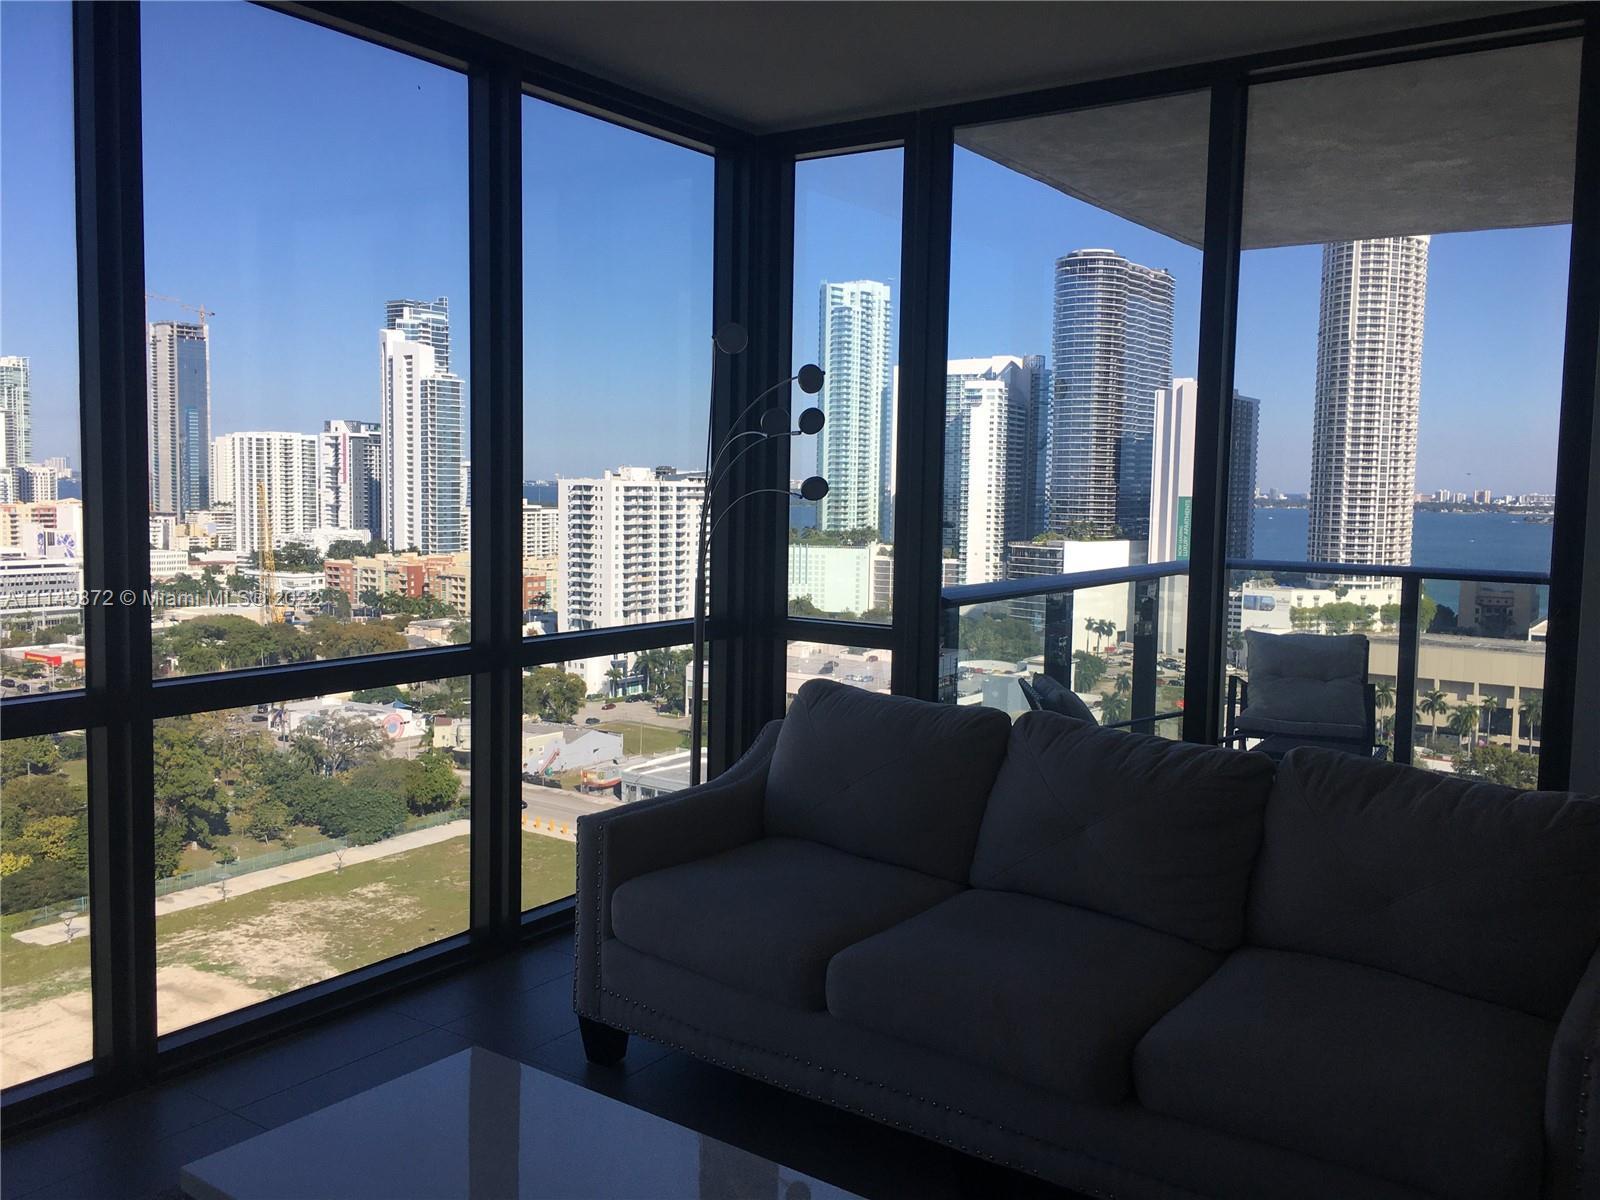 MAGNIFICENT UNOBSTRUCTED WATER VIEWS FROM ALL ROOMS IN THIS LUXURIOUS 2 BEDROOM 2 BATH IN THE HEART 